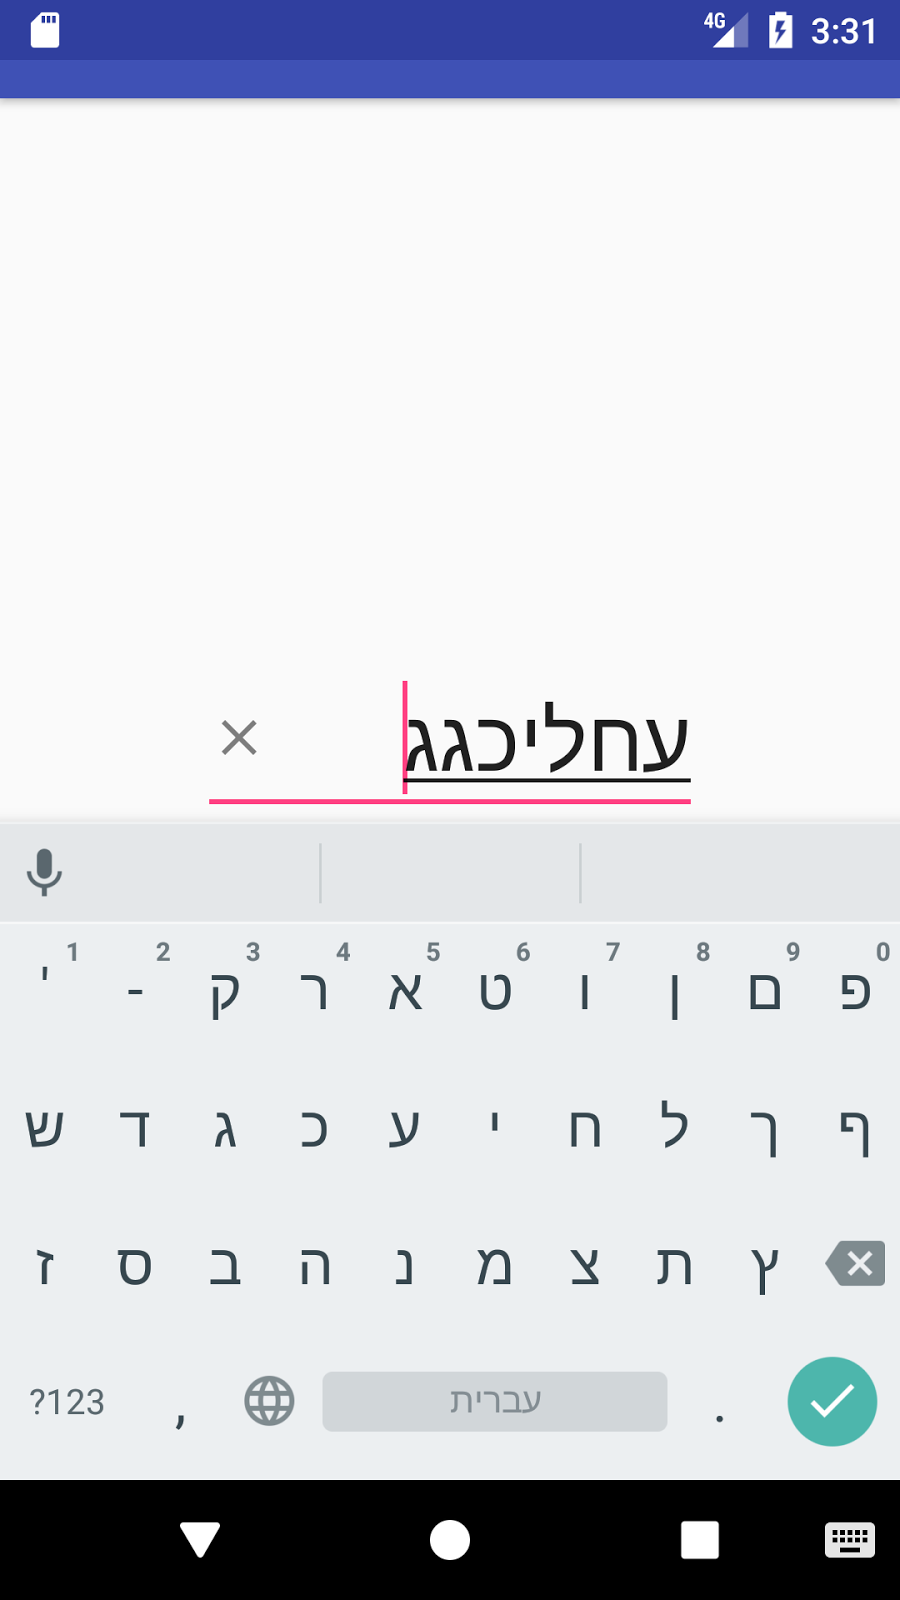  The CustomEditText app with an RTL language (Hebrew).